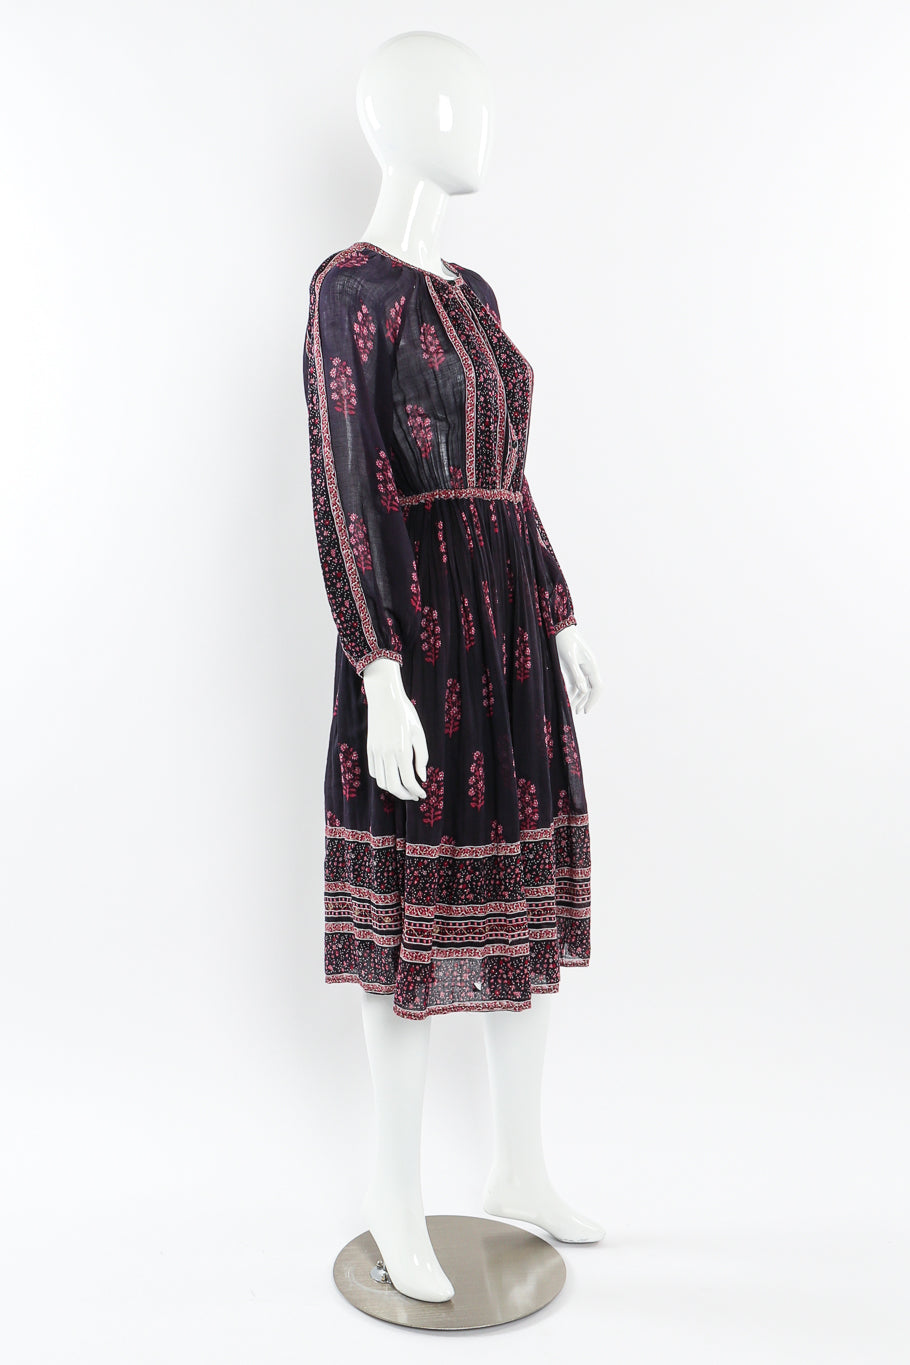 Cotton peasant dress by Mayur on mannequin side @recessla